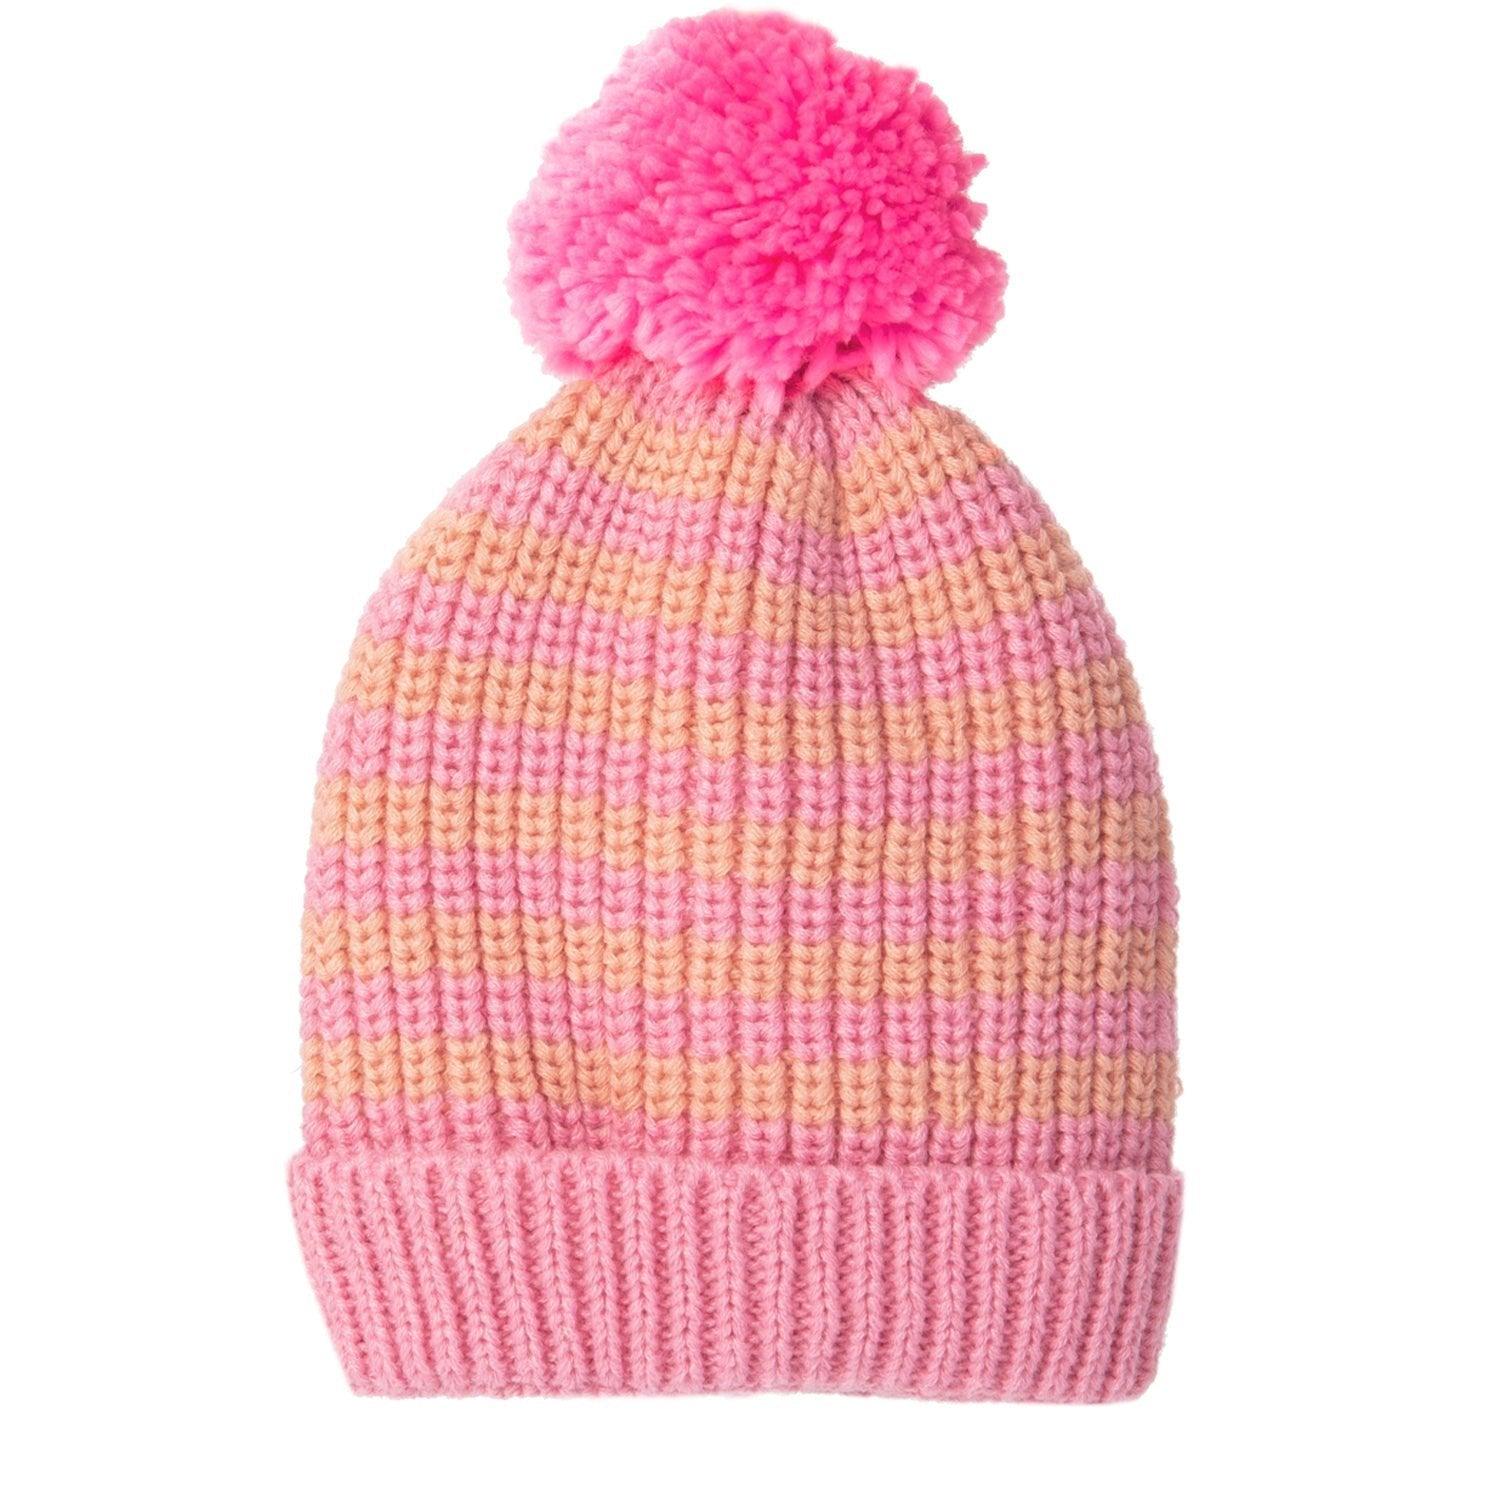 Children's Pink Knitted Bobble Hat - My Store - thinking of you gifts by post